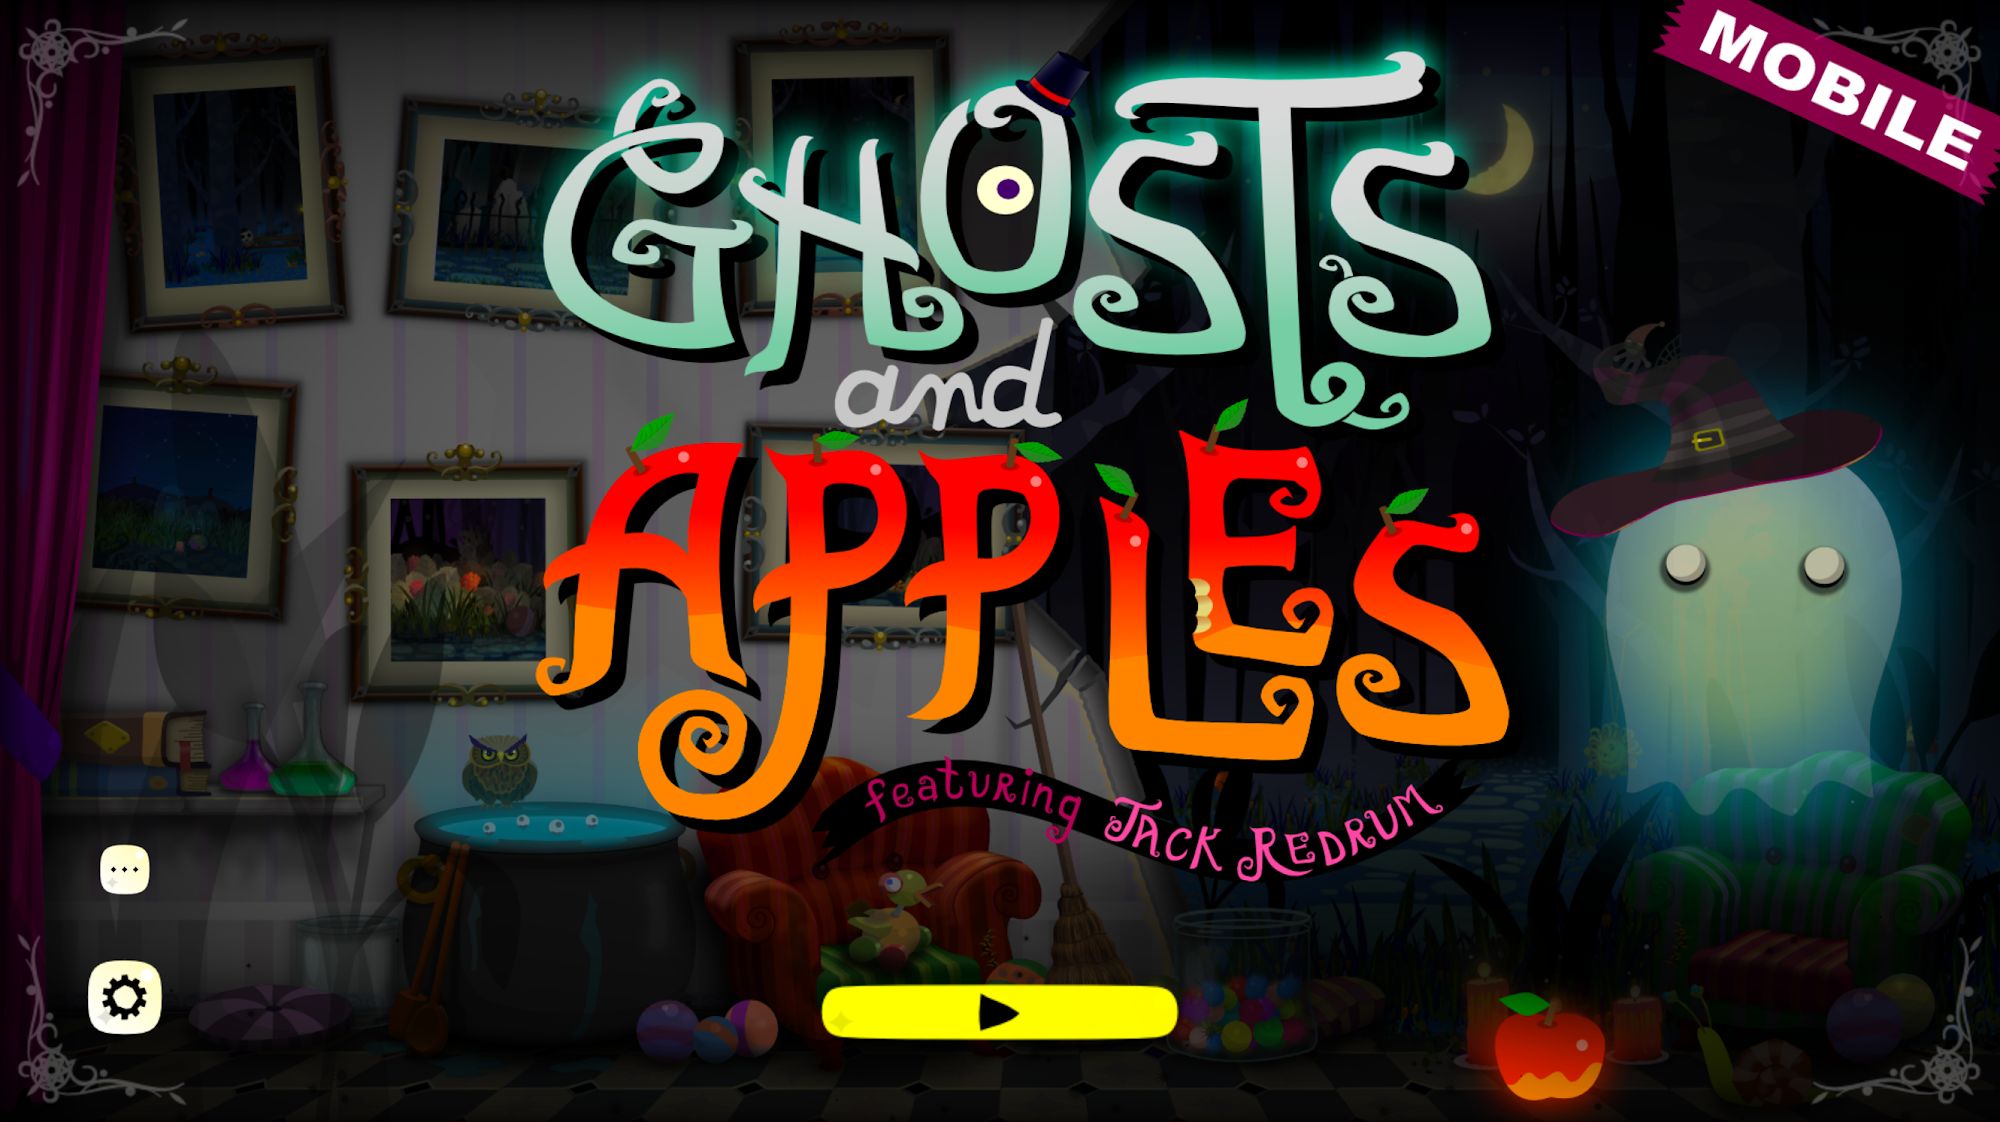 Scarica Ghosts and Apples Mobile gratis per Android.